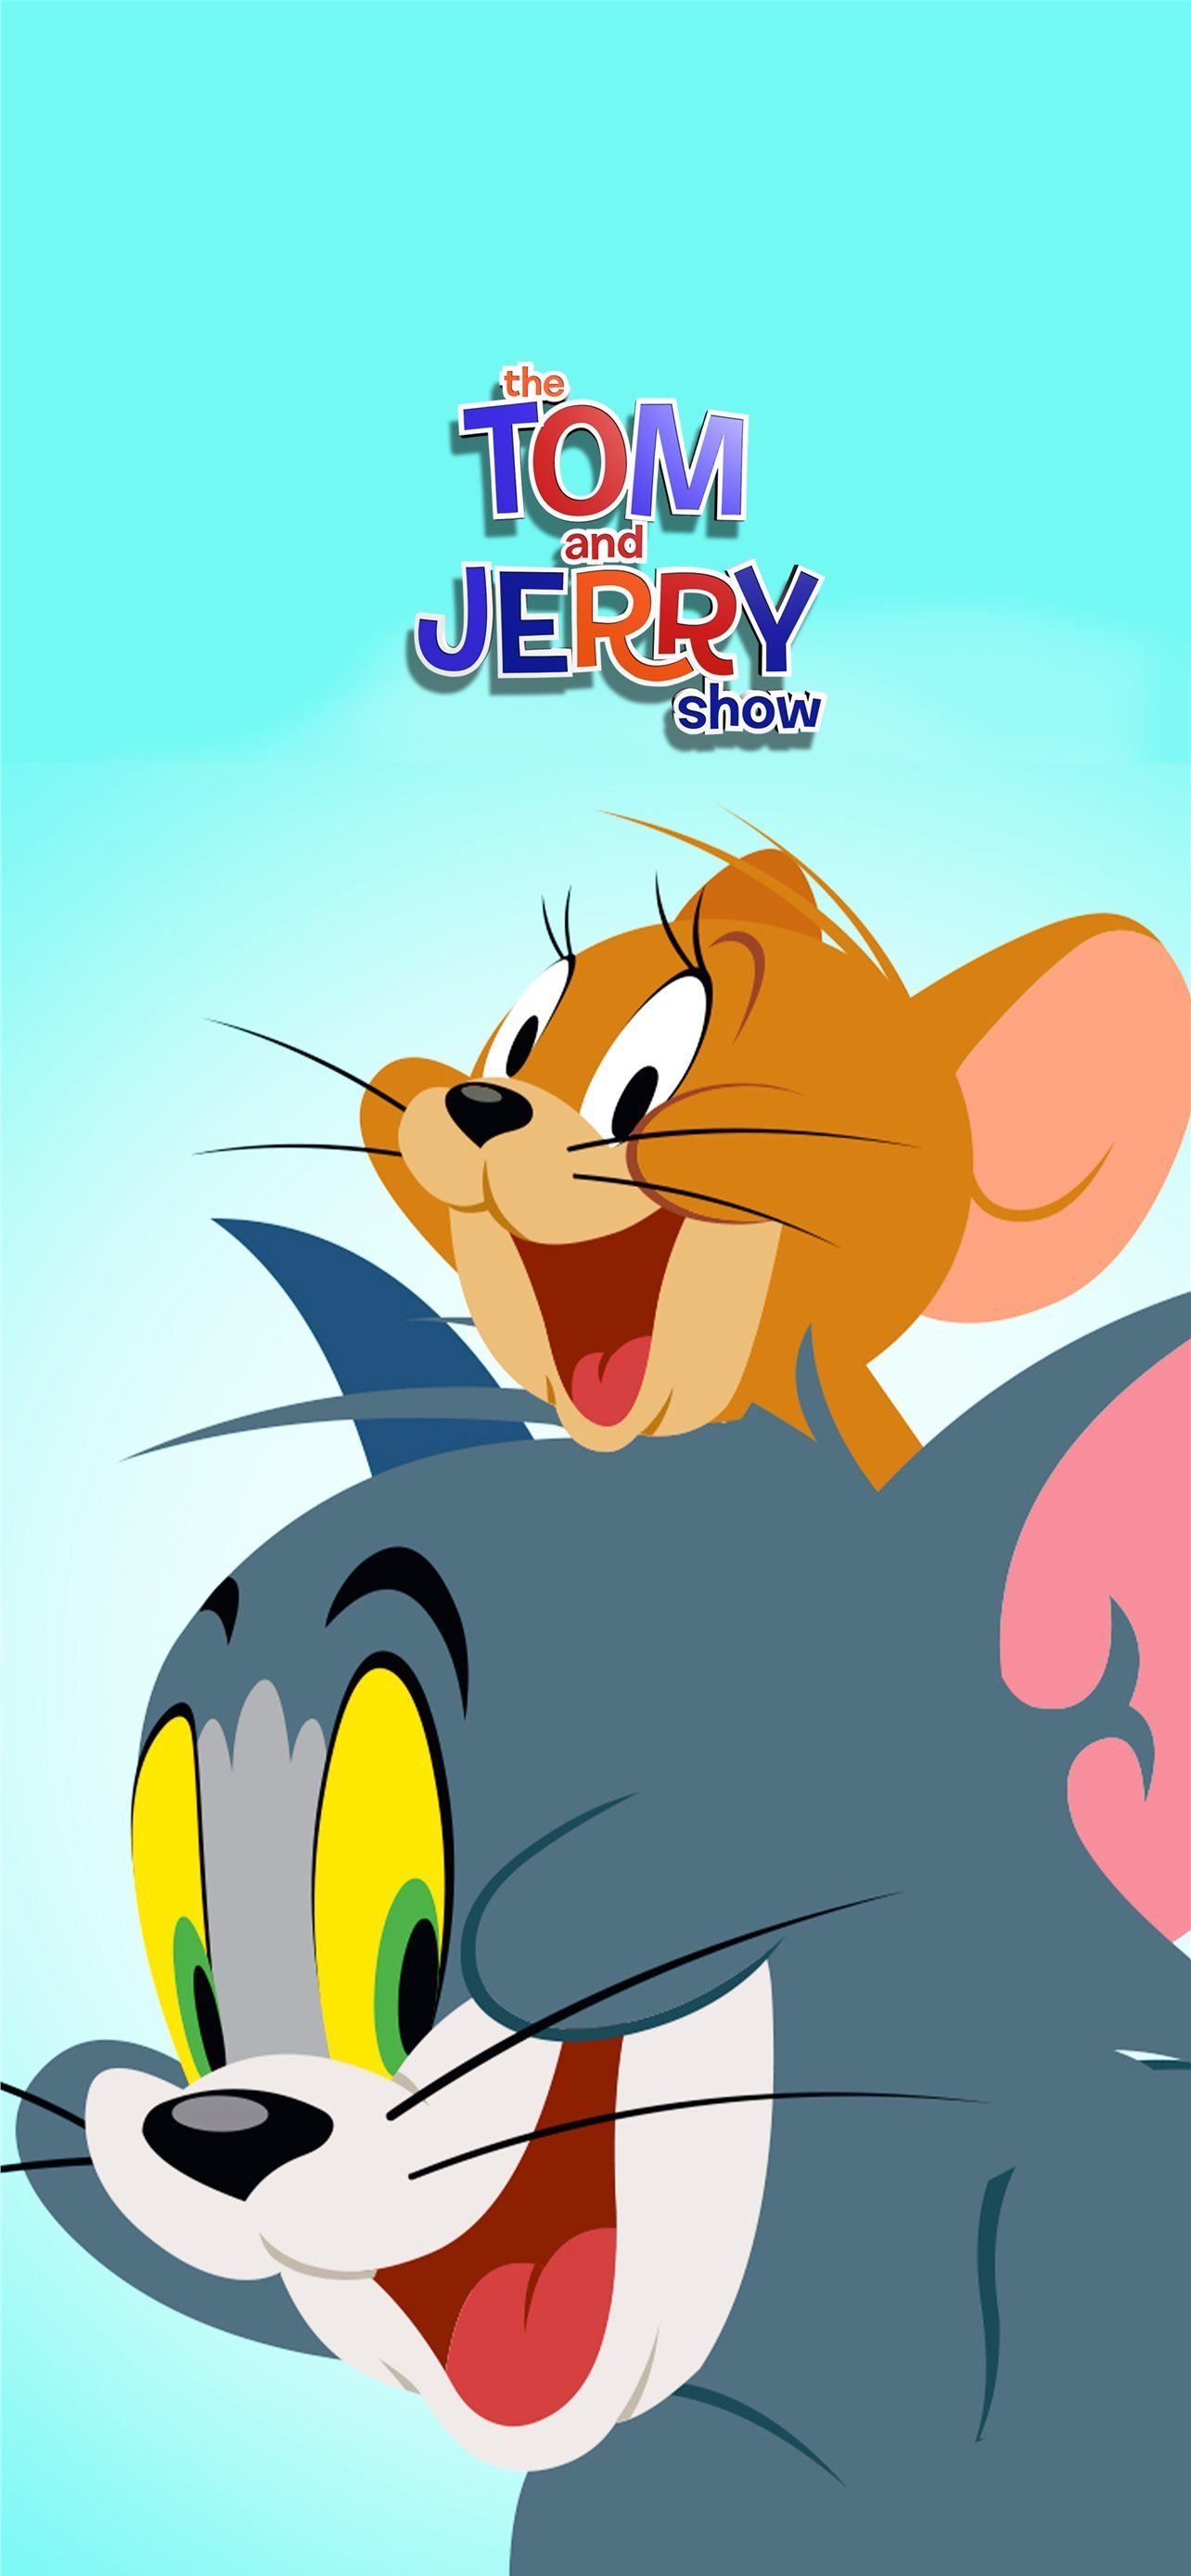 Tom and Jerry wallpaper for iPhone and Android devices - Tom and Jerry